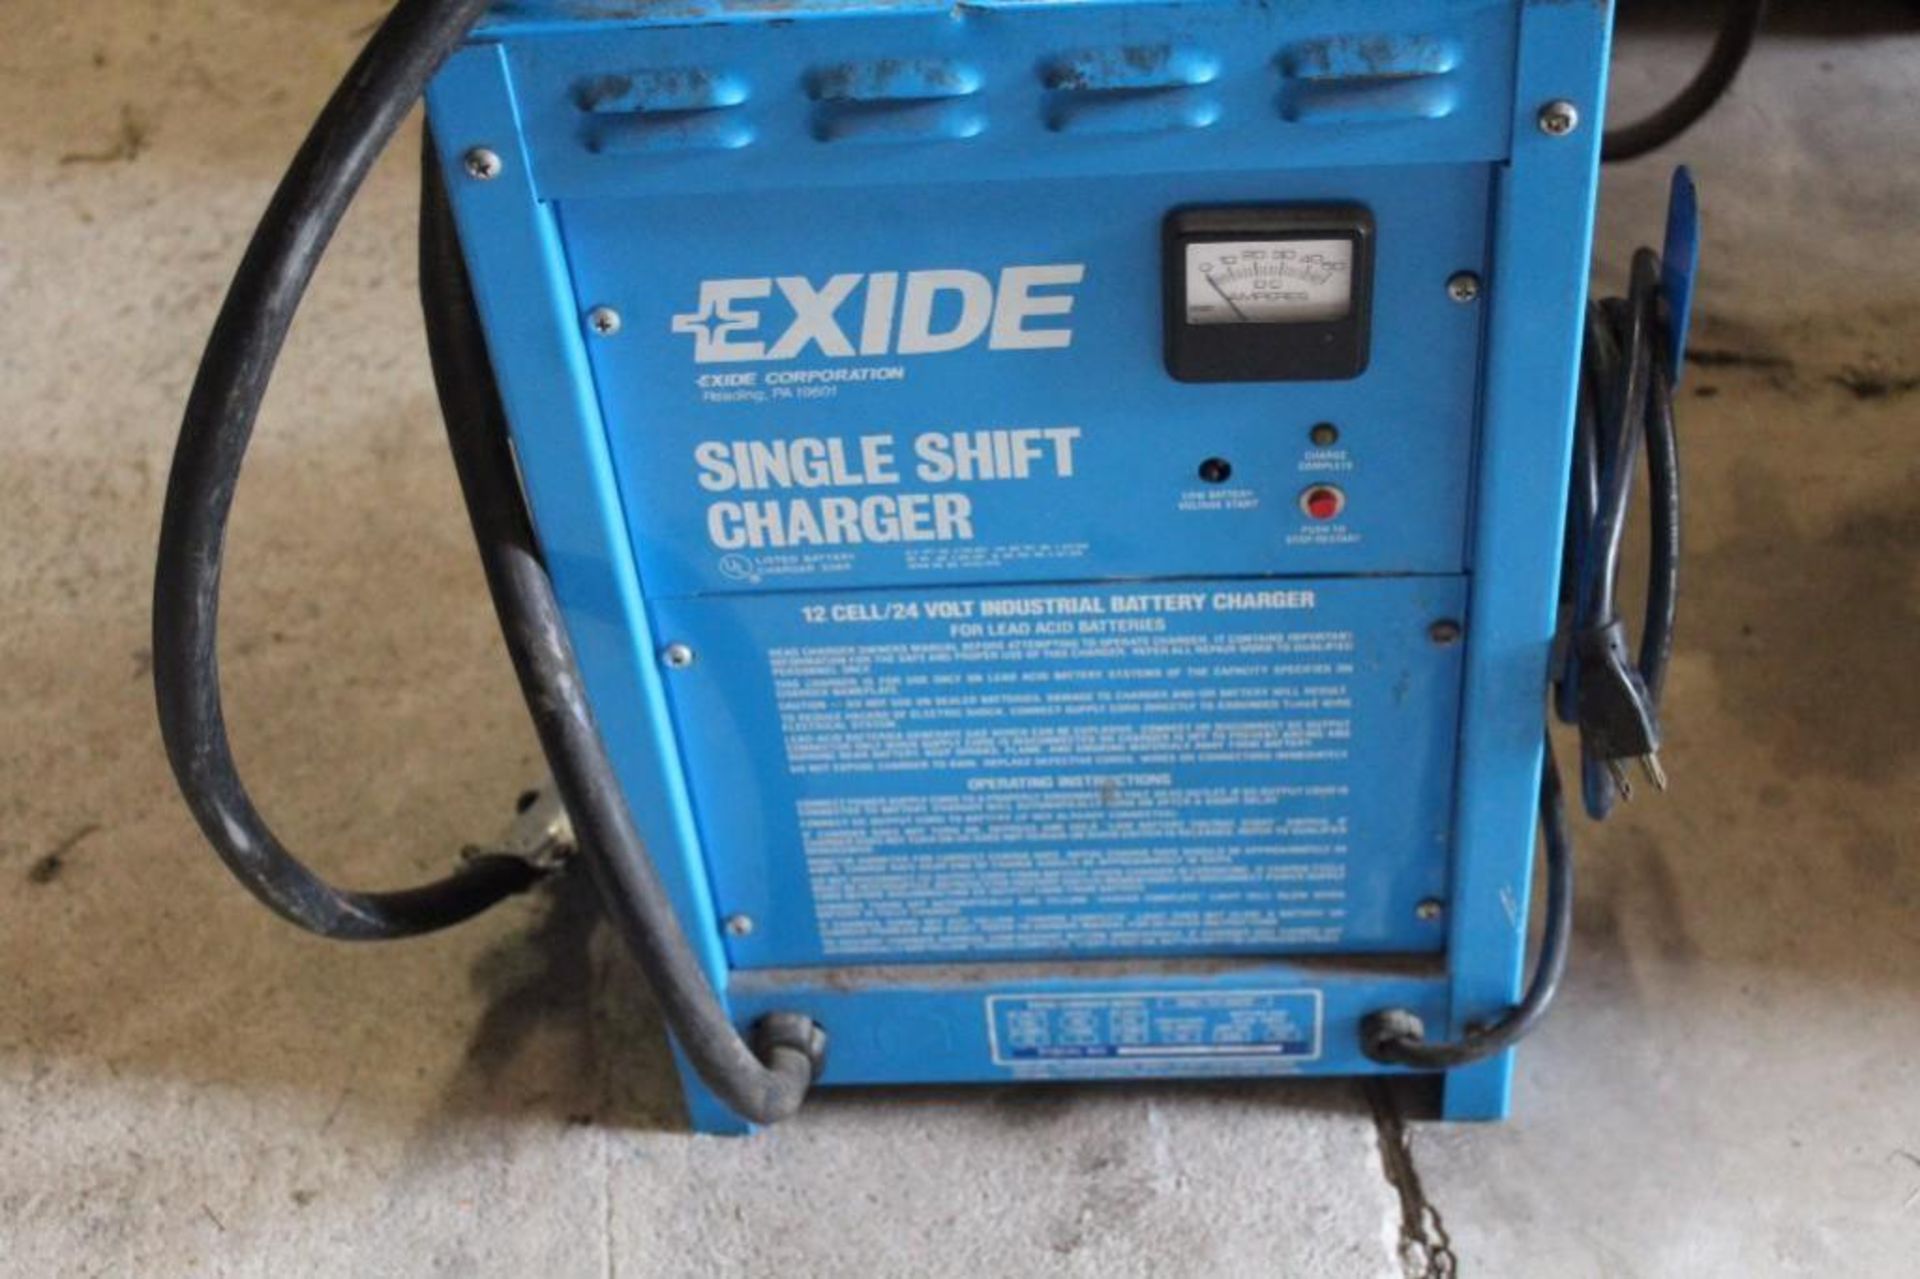 Exide single shift charger 12 cell 24 volt industrial battery charger 1ph, 120 volt - Image 3 of 3